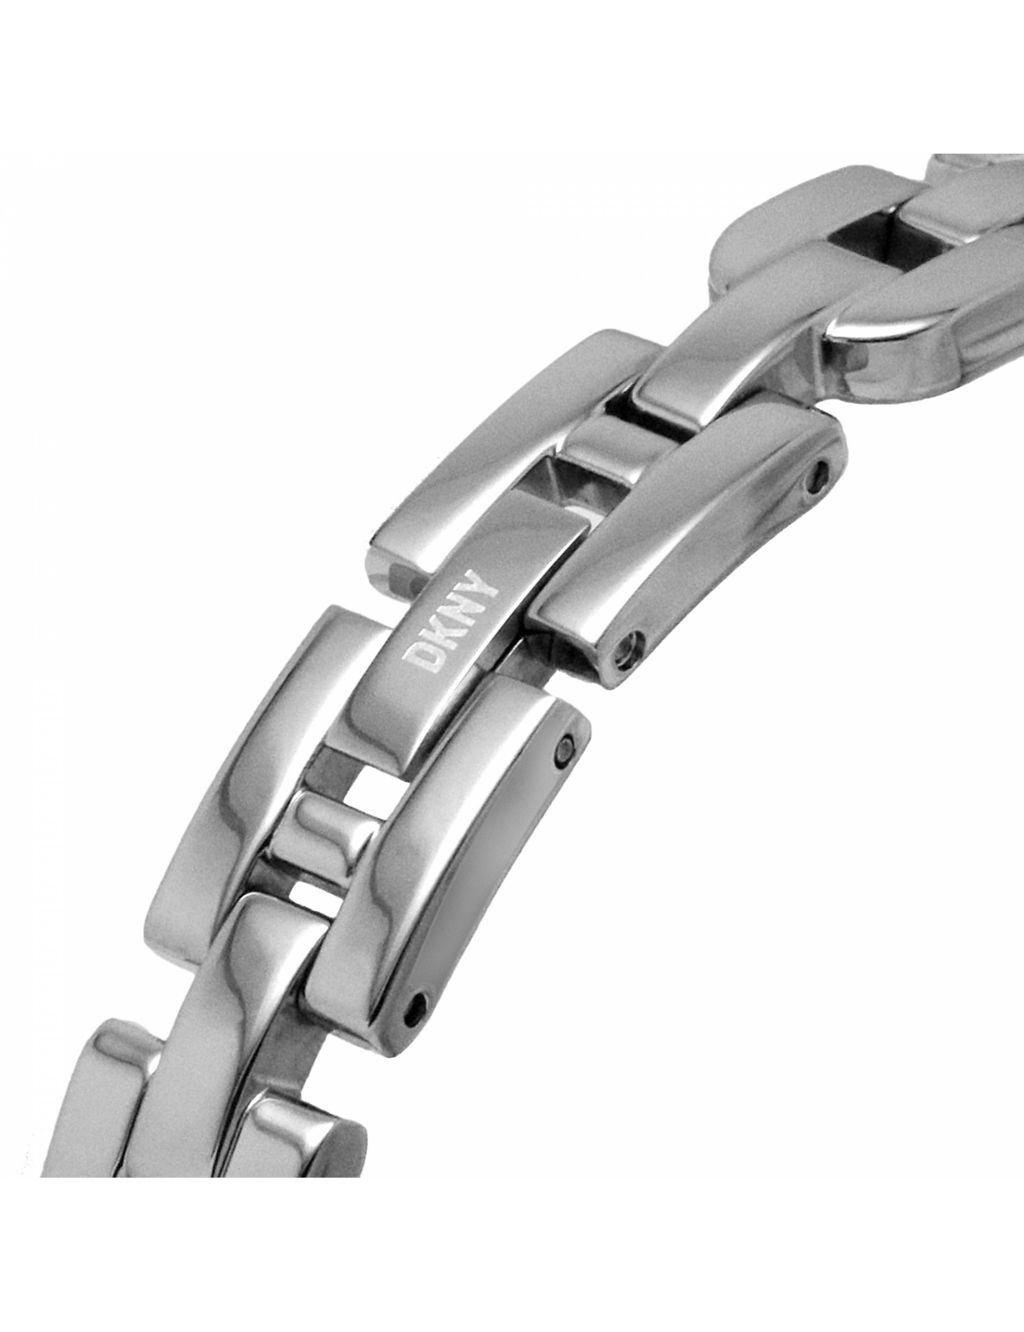 DKNY City Link Silver Watch image 7